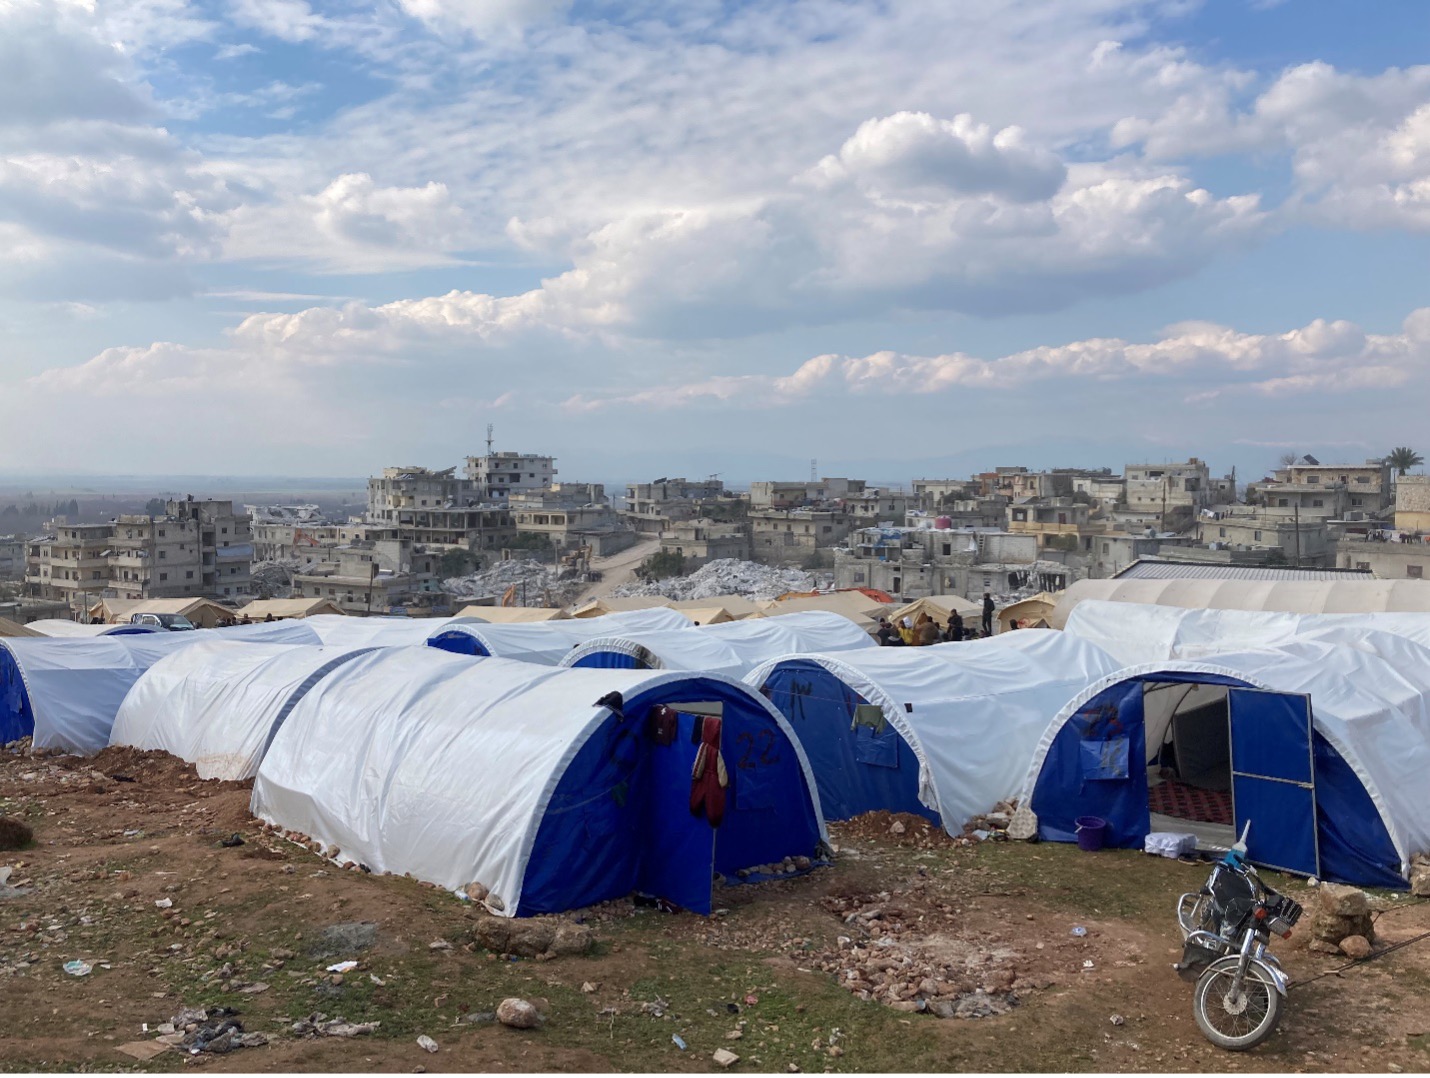 Those whose homes collapsed or are too dangerous to live in have been relocated to nearby camps. Camps like this one in Harem are set up and overseen by the MDHA. In every town I visited, from Maland to Atareb, I saw different NGOs delivering blankets and food to residents. 